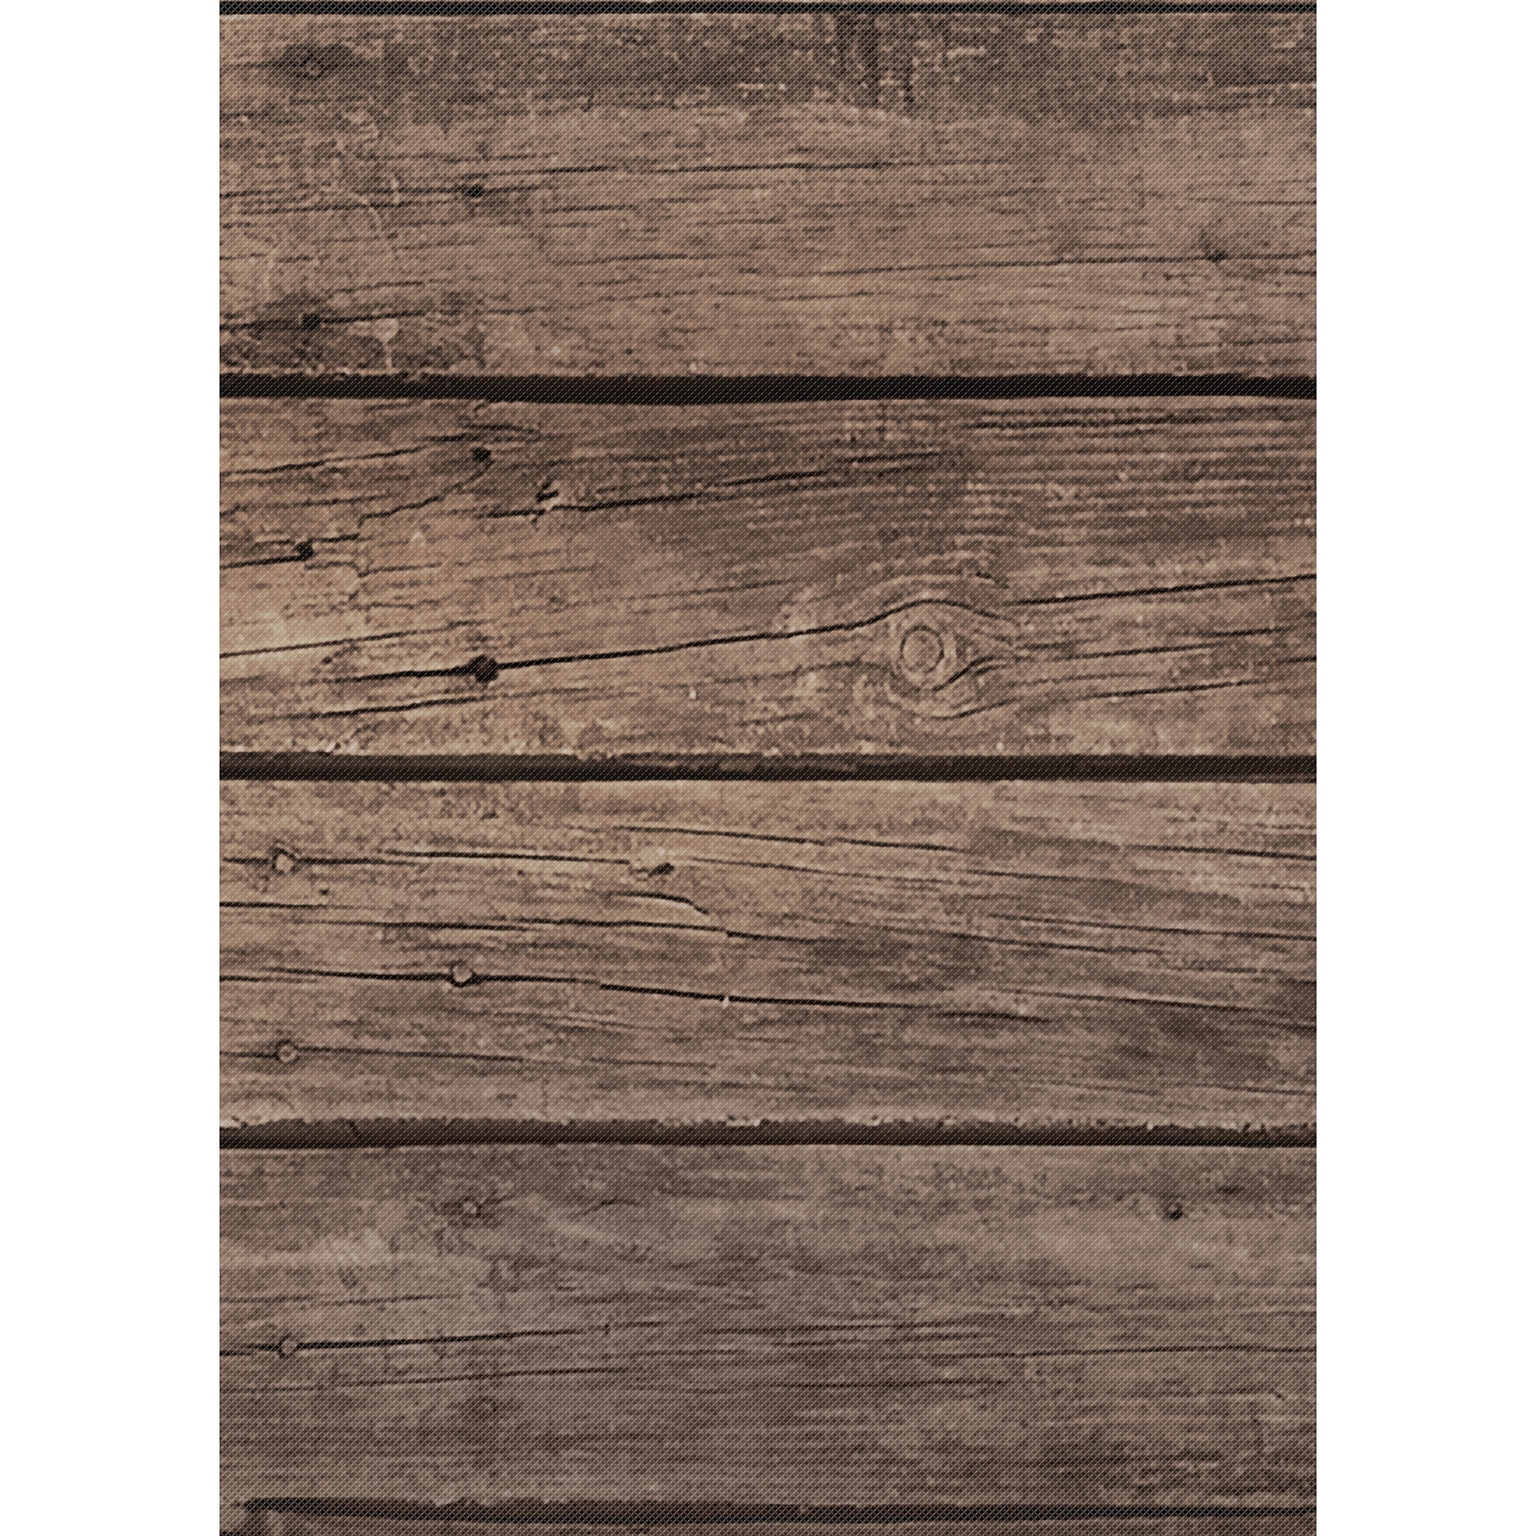 Teacher Created Resources Dark Wood Better Than Paper Bulletin Board Roll 4-Pack (TCR32205)